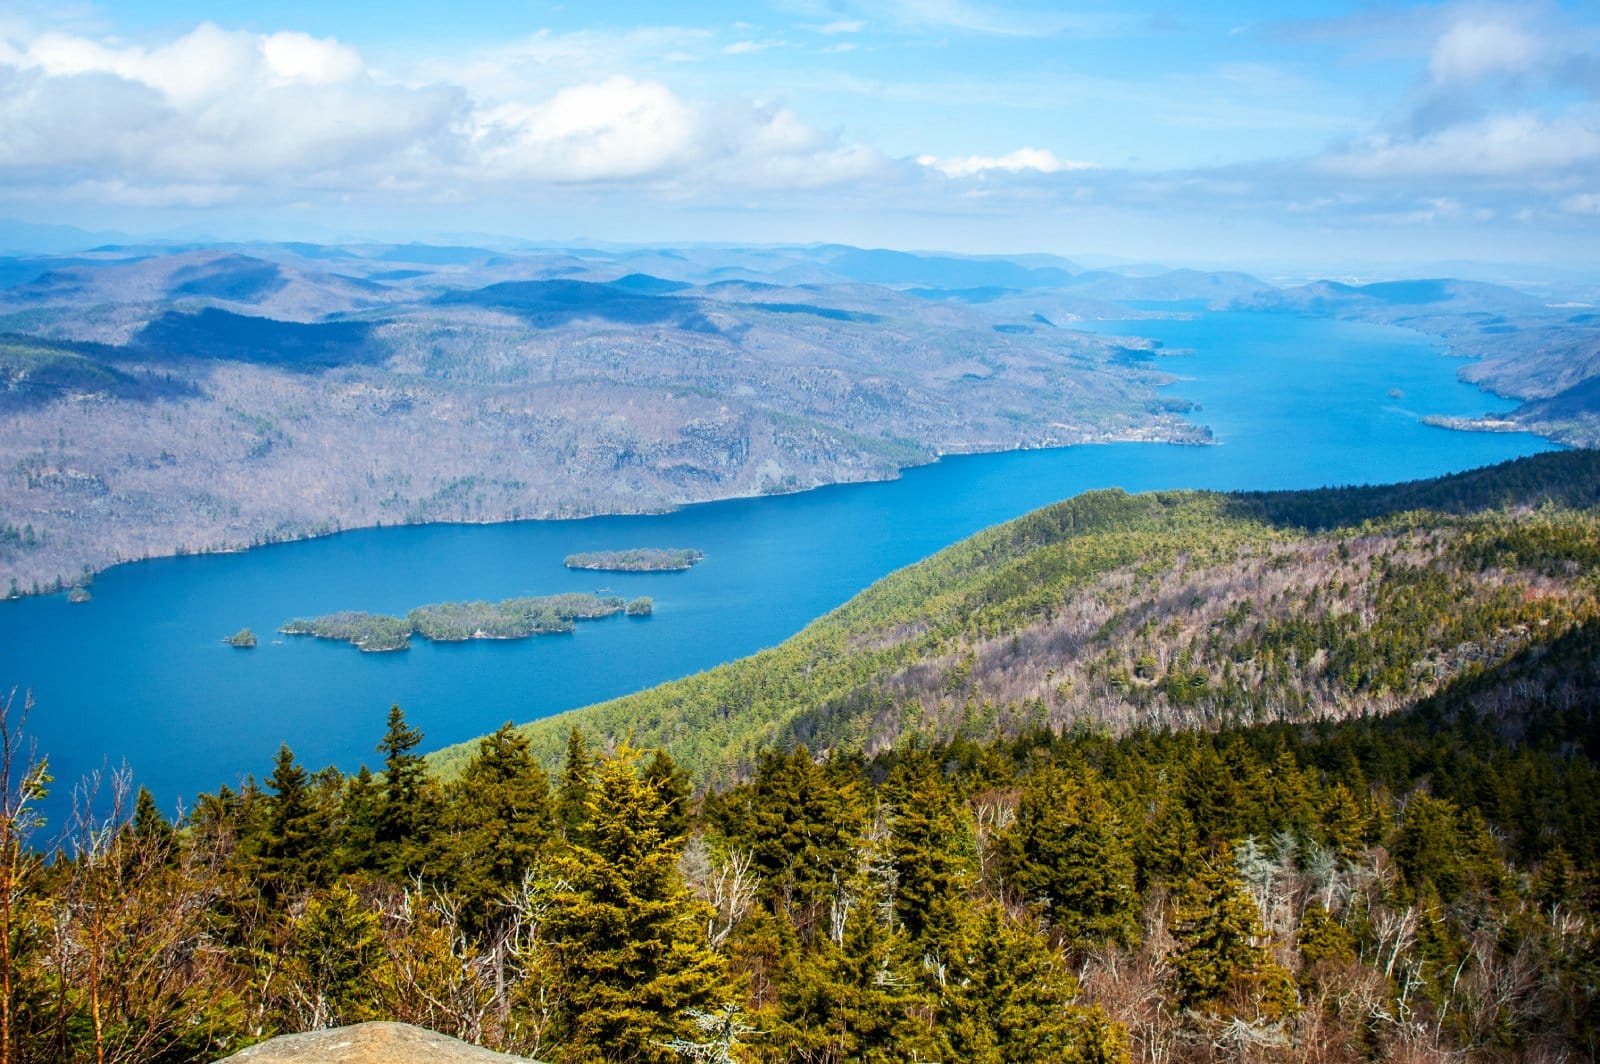 <p class="wp-caption-text">Image Credit: Shutterstock / James Casil</p>  <p><span><strong>Depth:</strong> 196 feet</span> <span>Affectionately known as the “Queen of American Lakes,” Lake George offers crystal-clear waters, surrounded by majestic mountains. Ideal for boating, hiking, and exploring historic forts.</span></p>